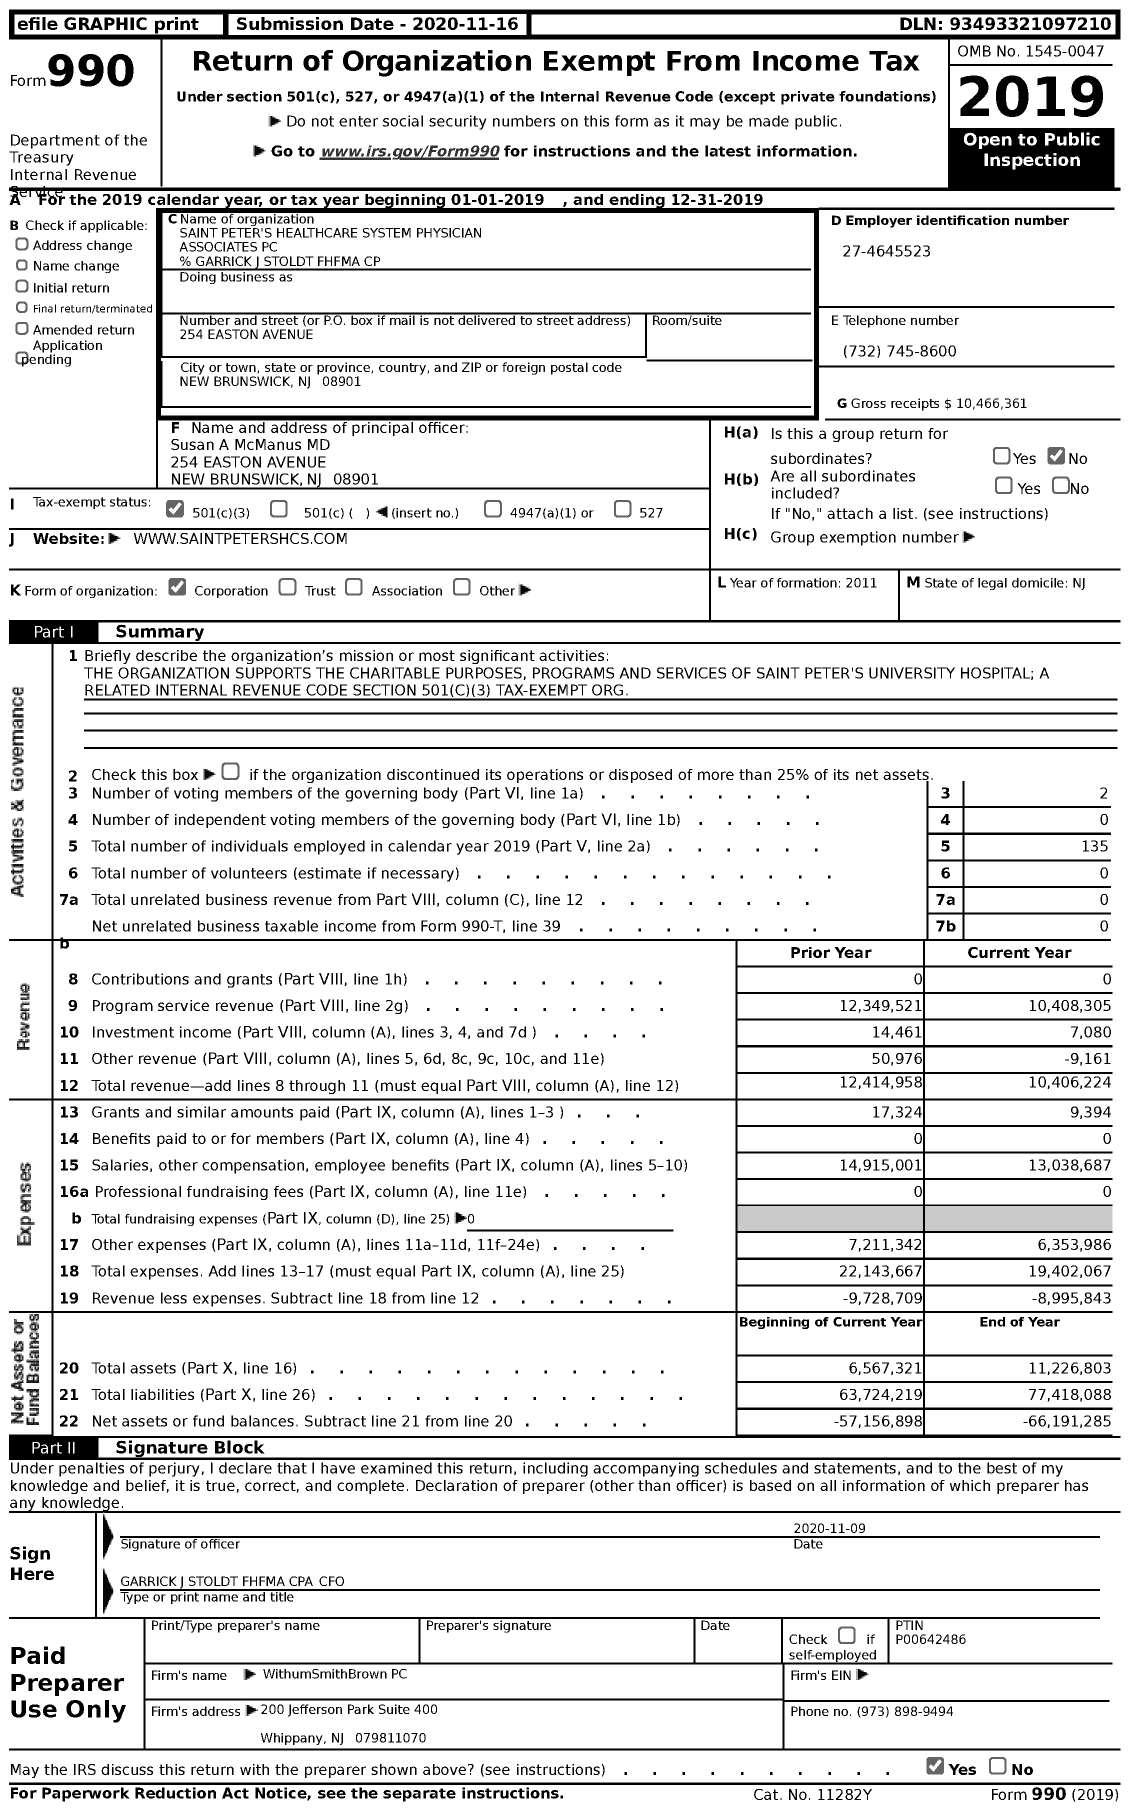 Image of first page of 2019 Form 990 for Saint Peter's Healthcare System Physician Associates PC